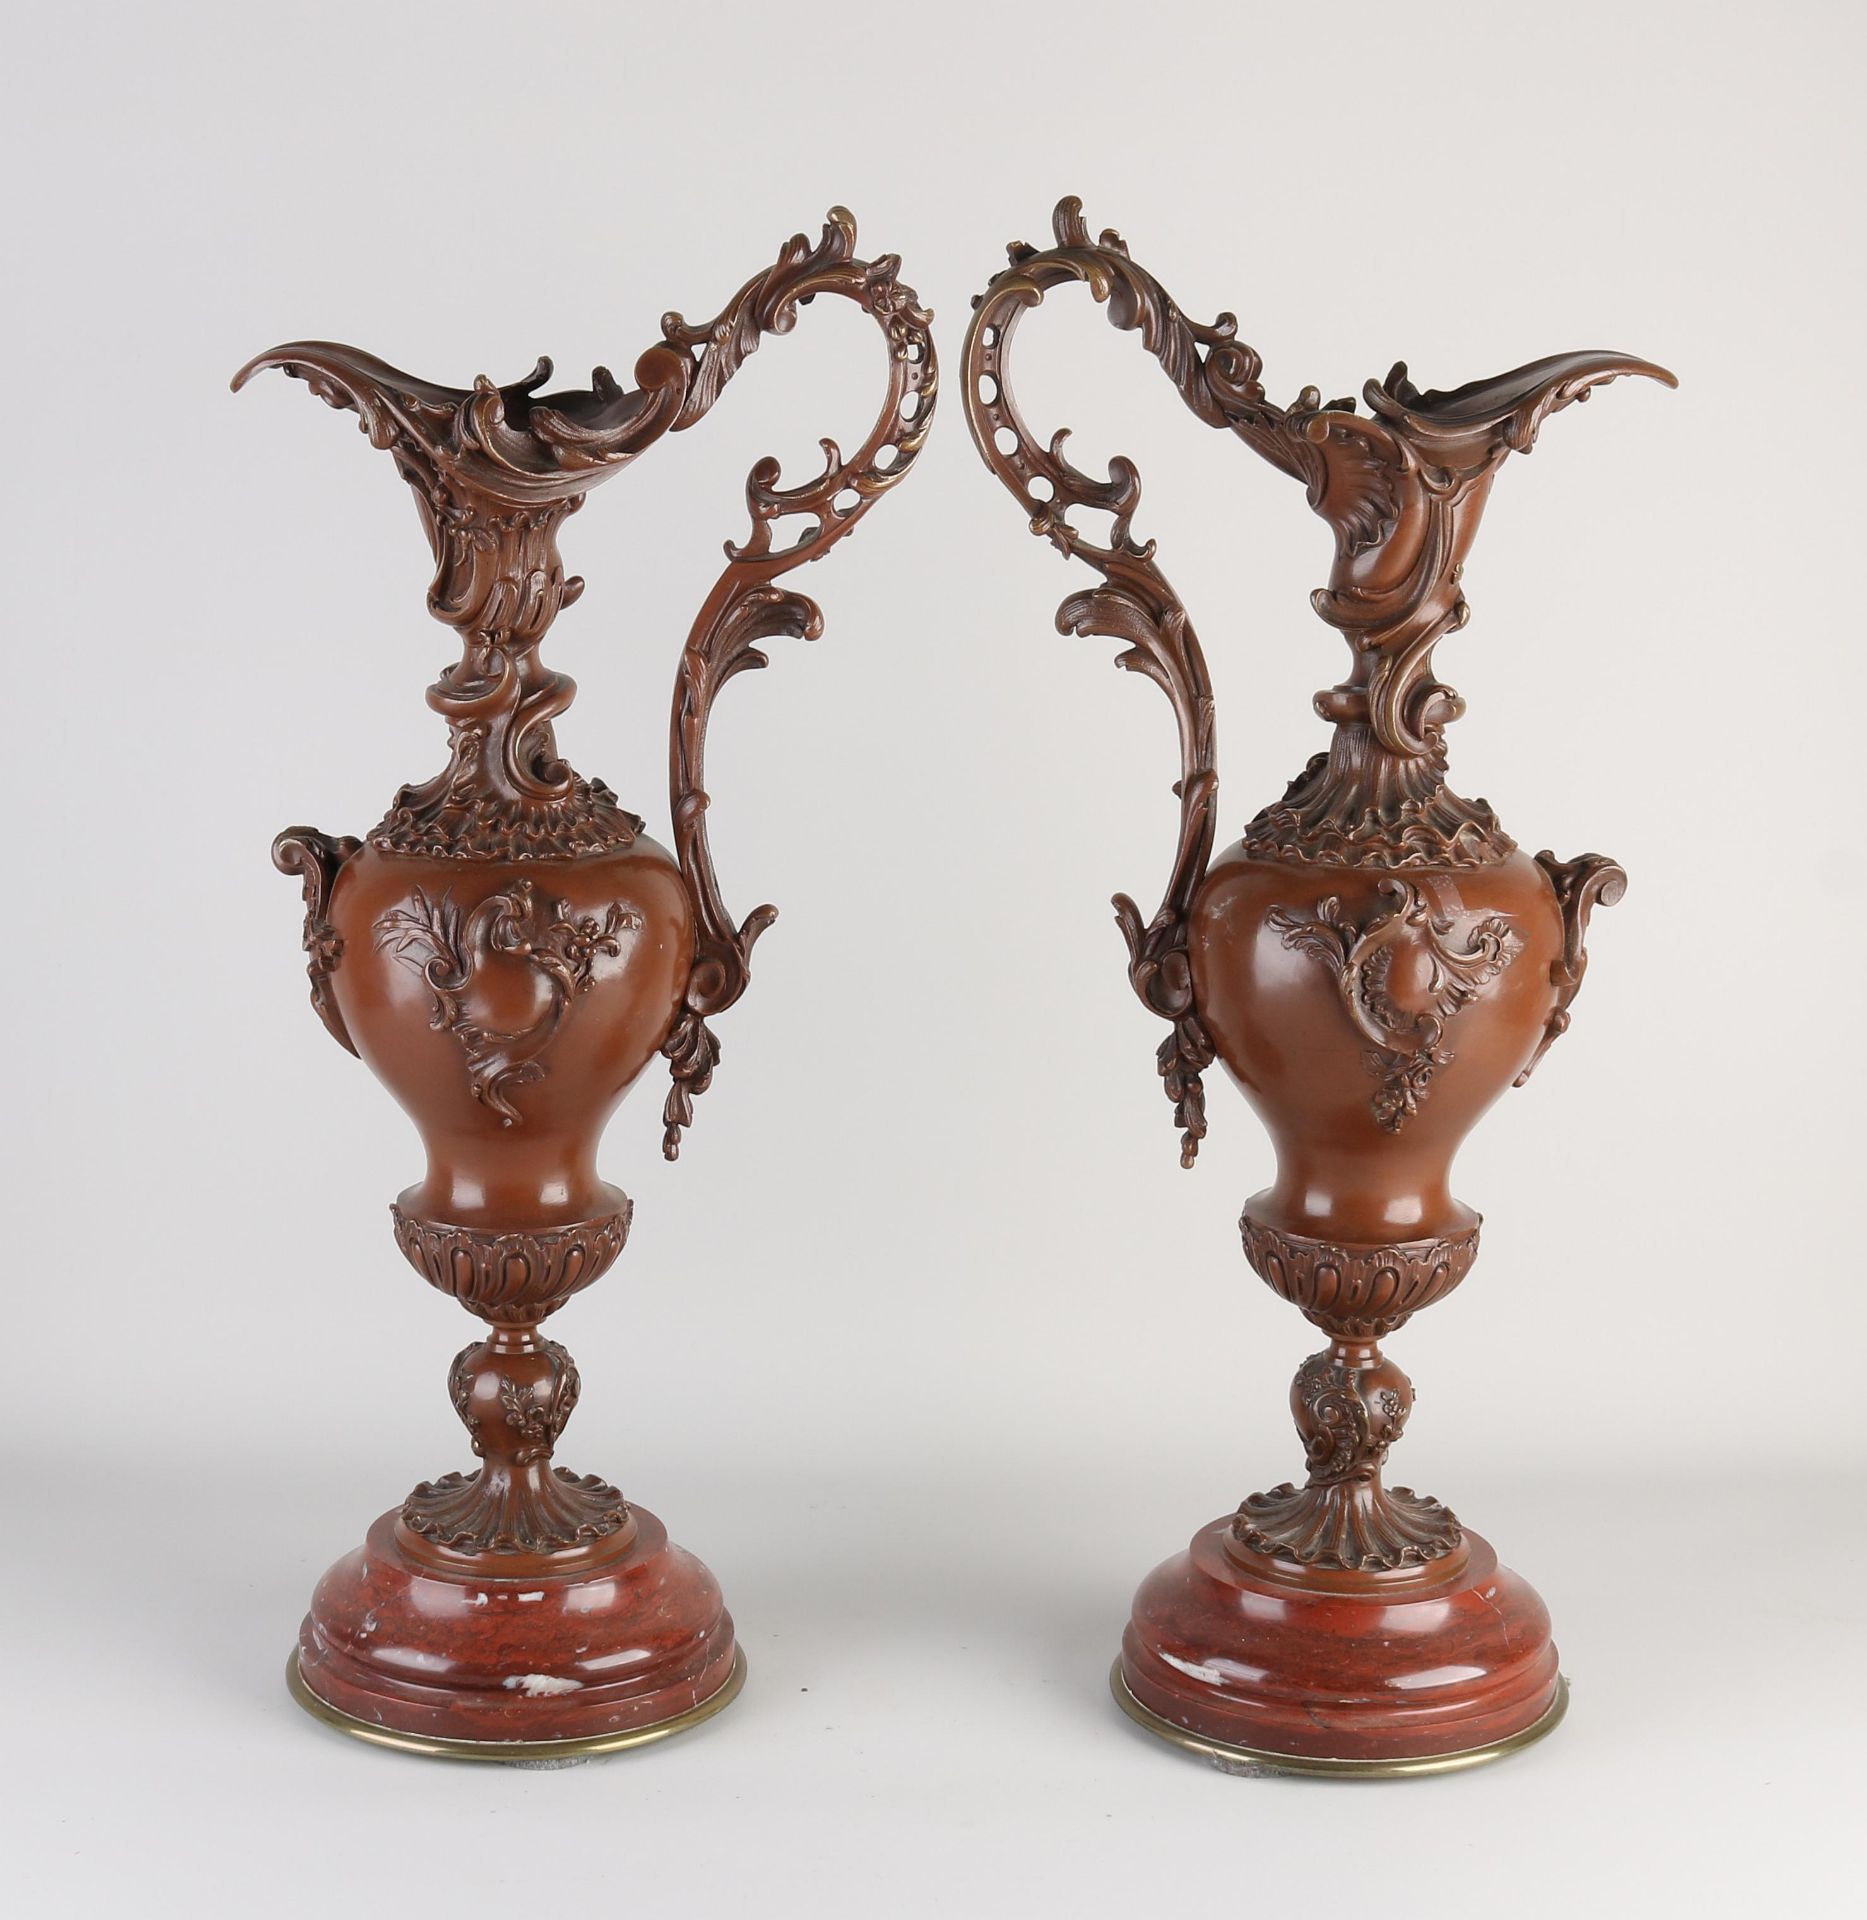 Two French bronze jugs, H 56 cm. - Image 2 of 2